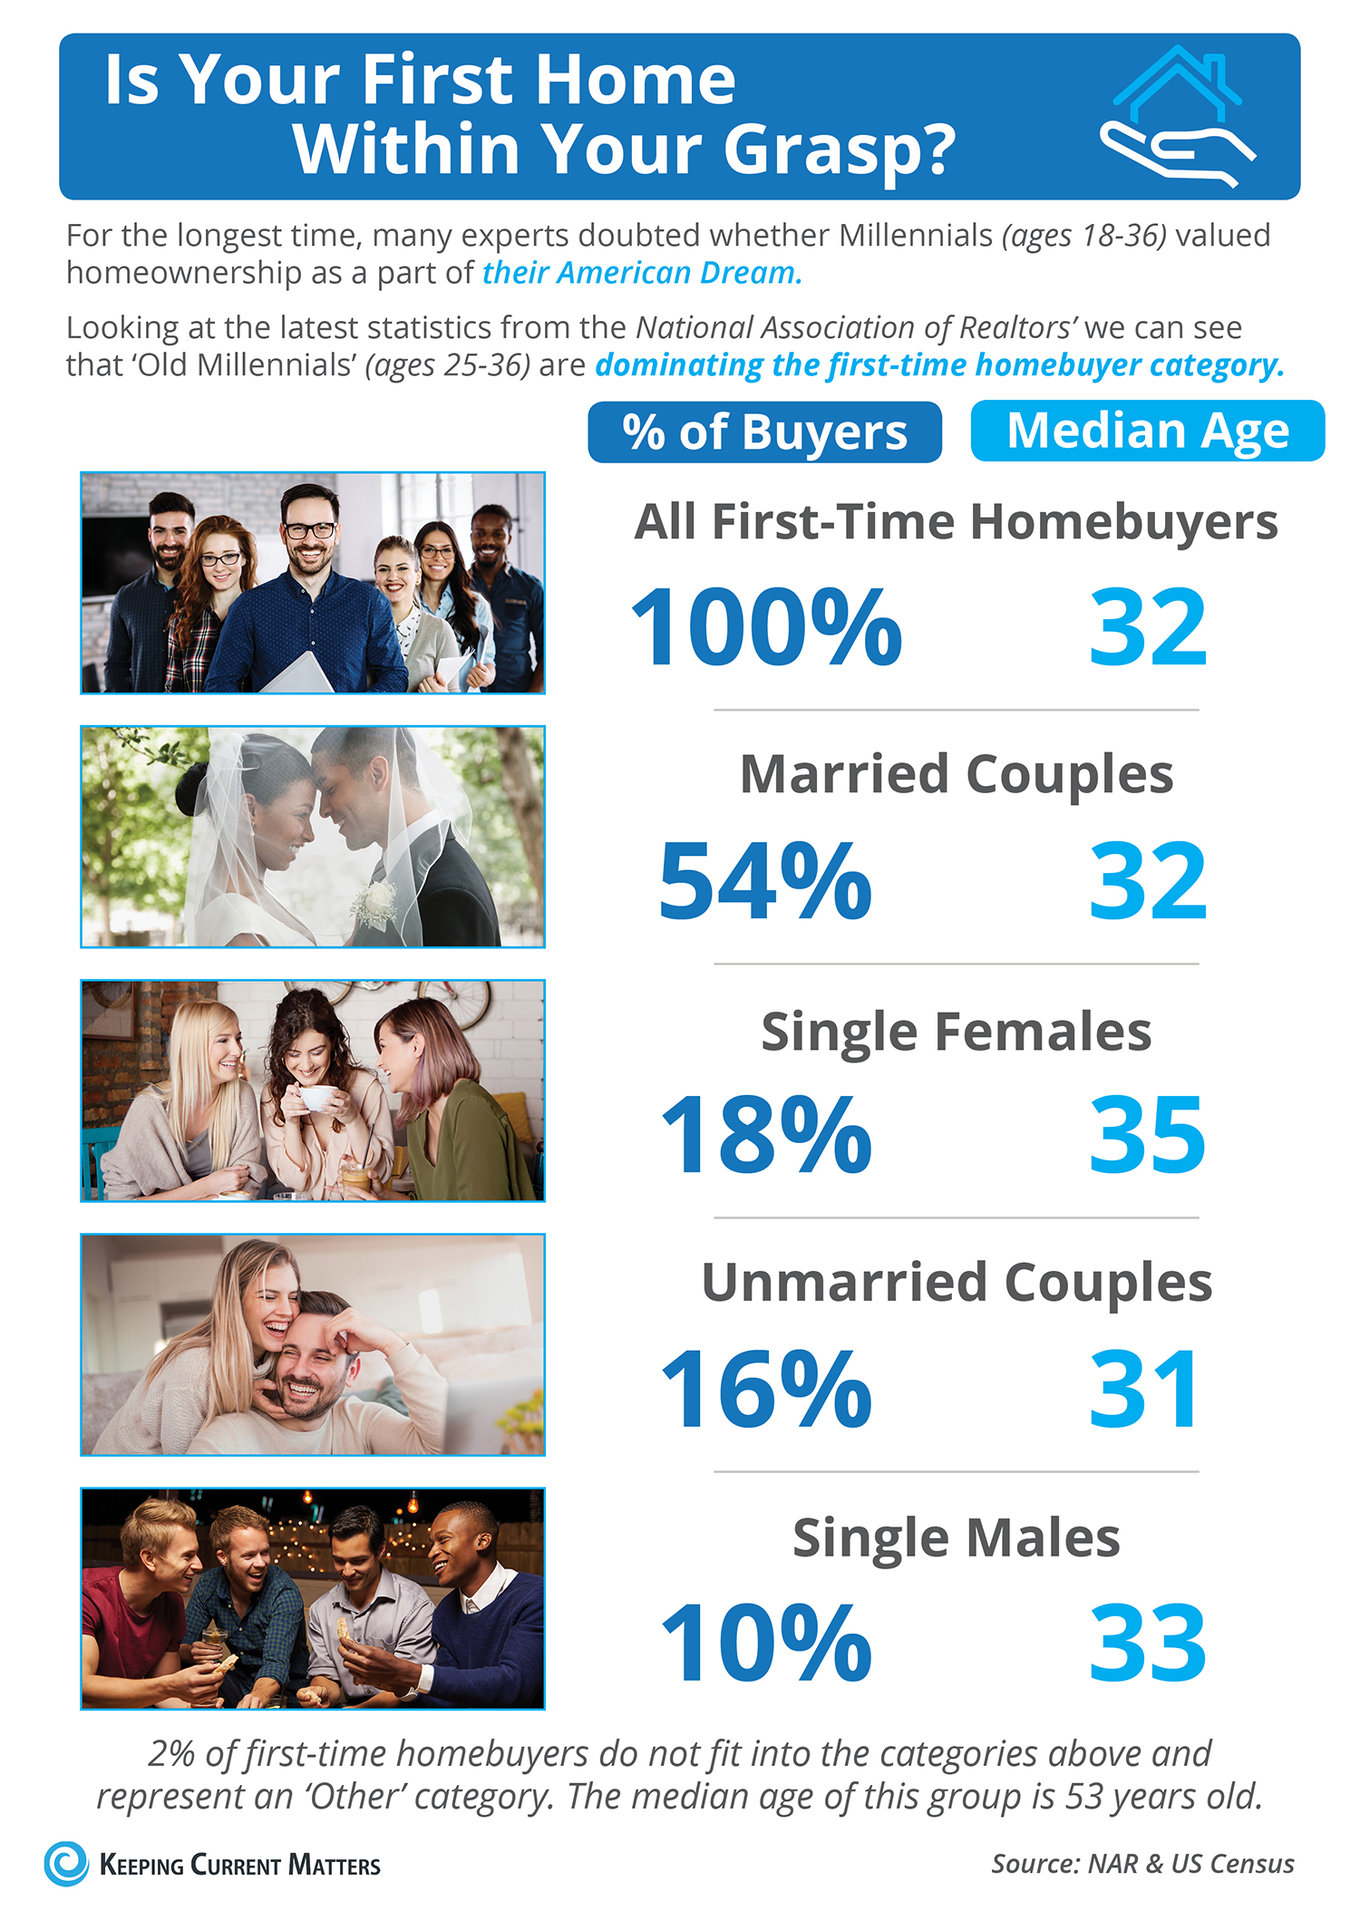 Is Your First Home Now Within Your Grasp? [INFOGRAPHIC] | Keeping Current Matters